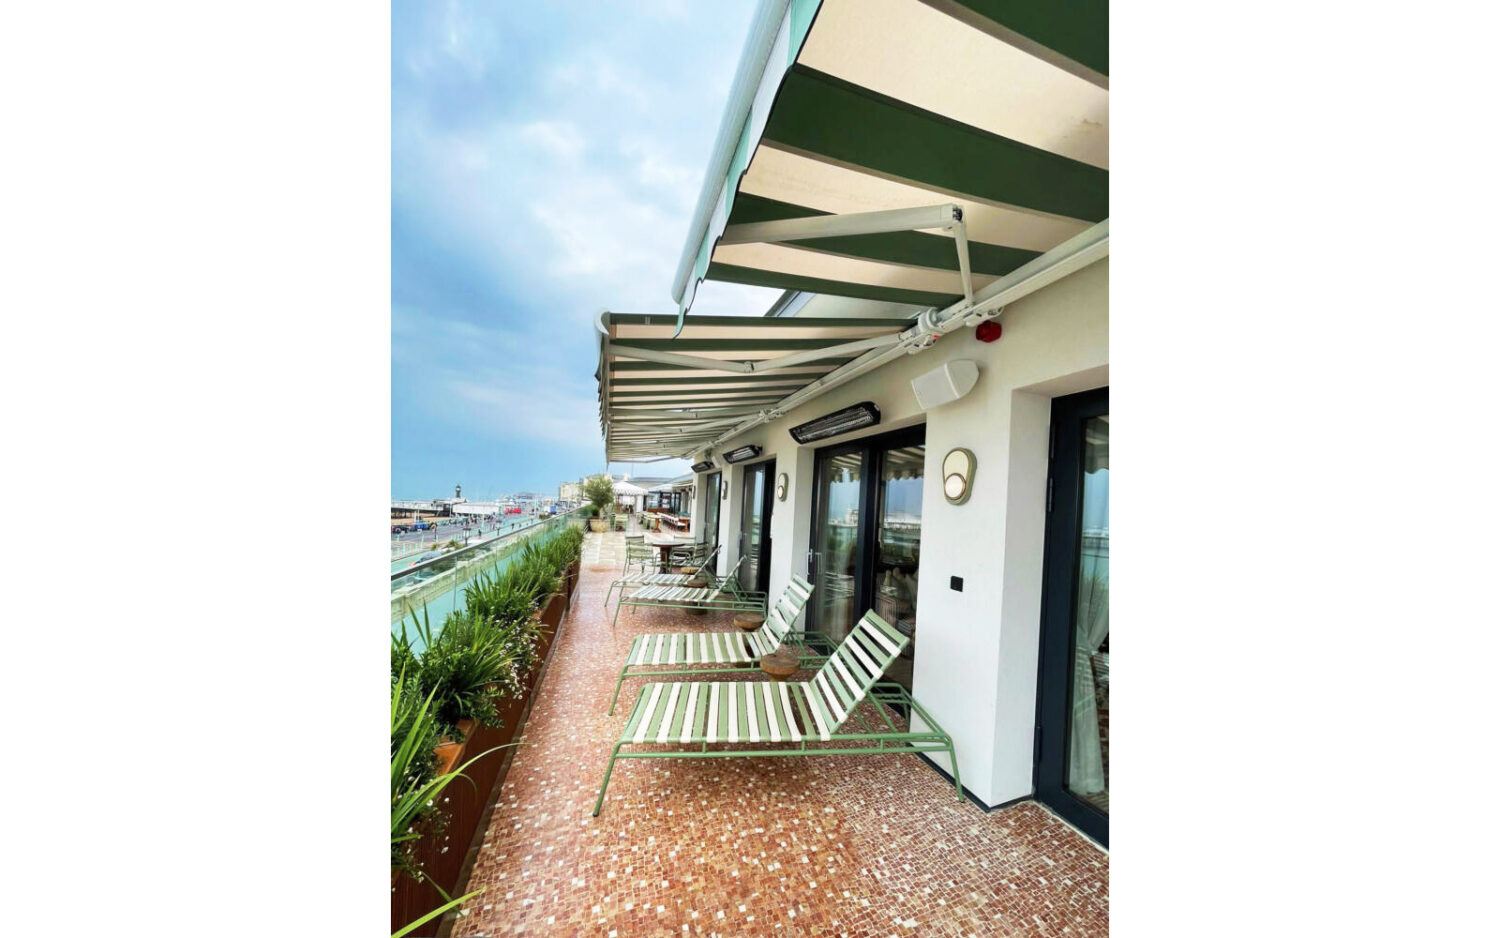 Commercial Terrace Awnings